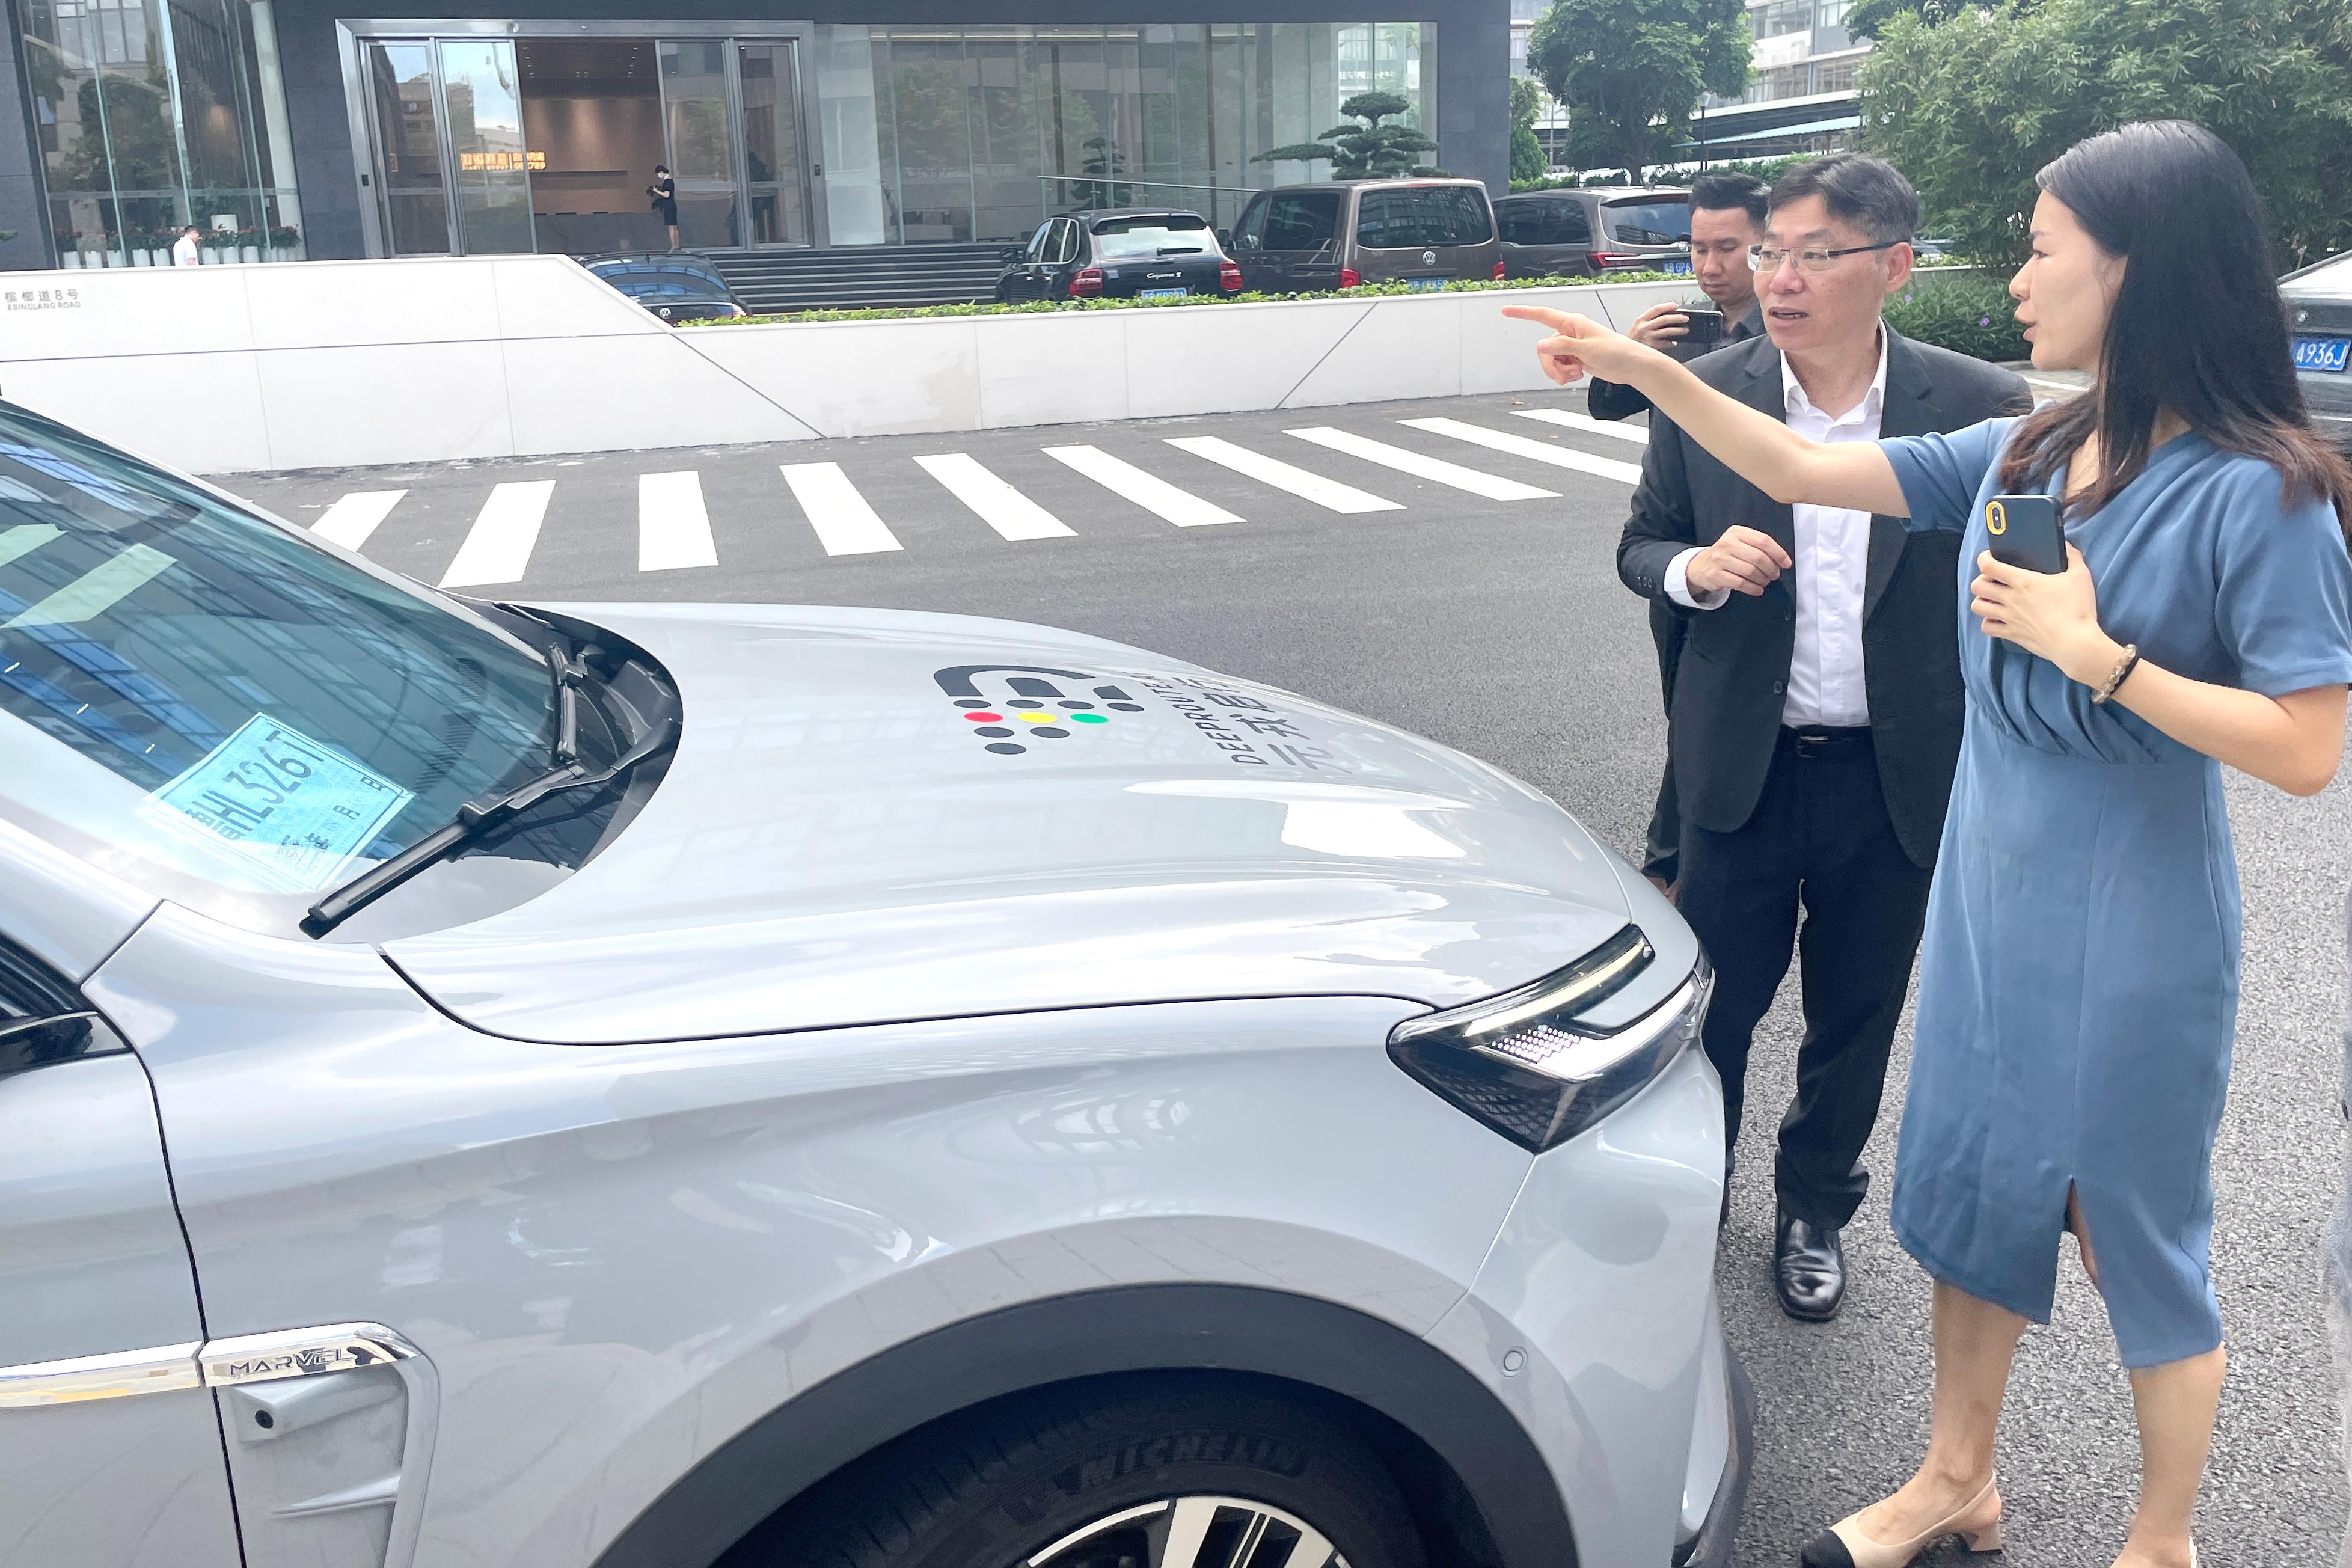 The Secretary for Transport and Logistics, Mr Lam Sai-hung, continued his visit to Shenzhen today (July 20). Photo shows Mr Lam (second right) being briefed by a representative (first right) of DeepRoute.ai on the company's autonomous vehicle services.

